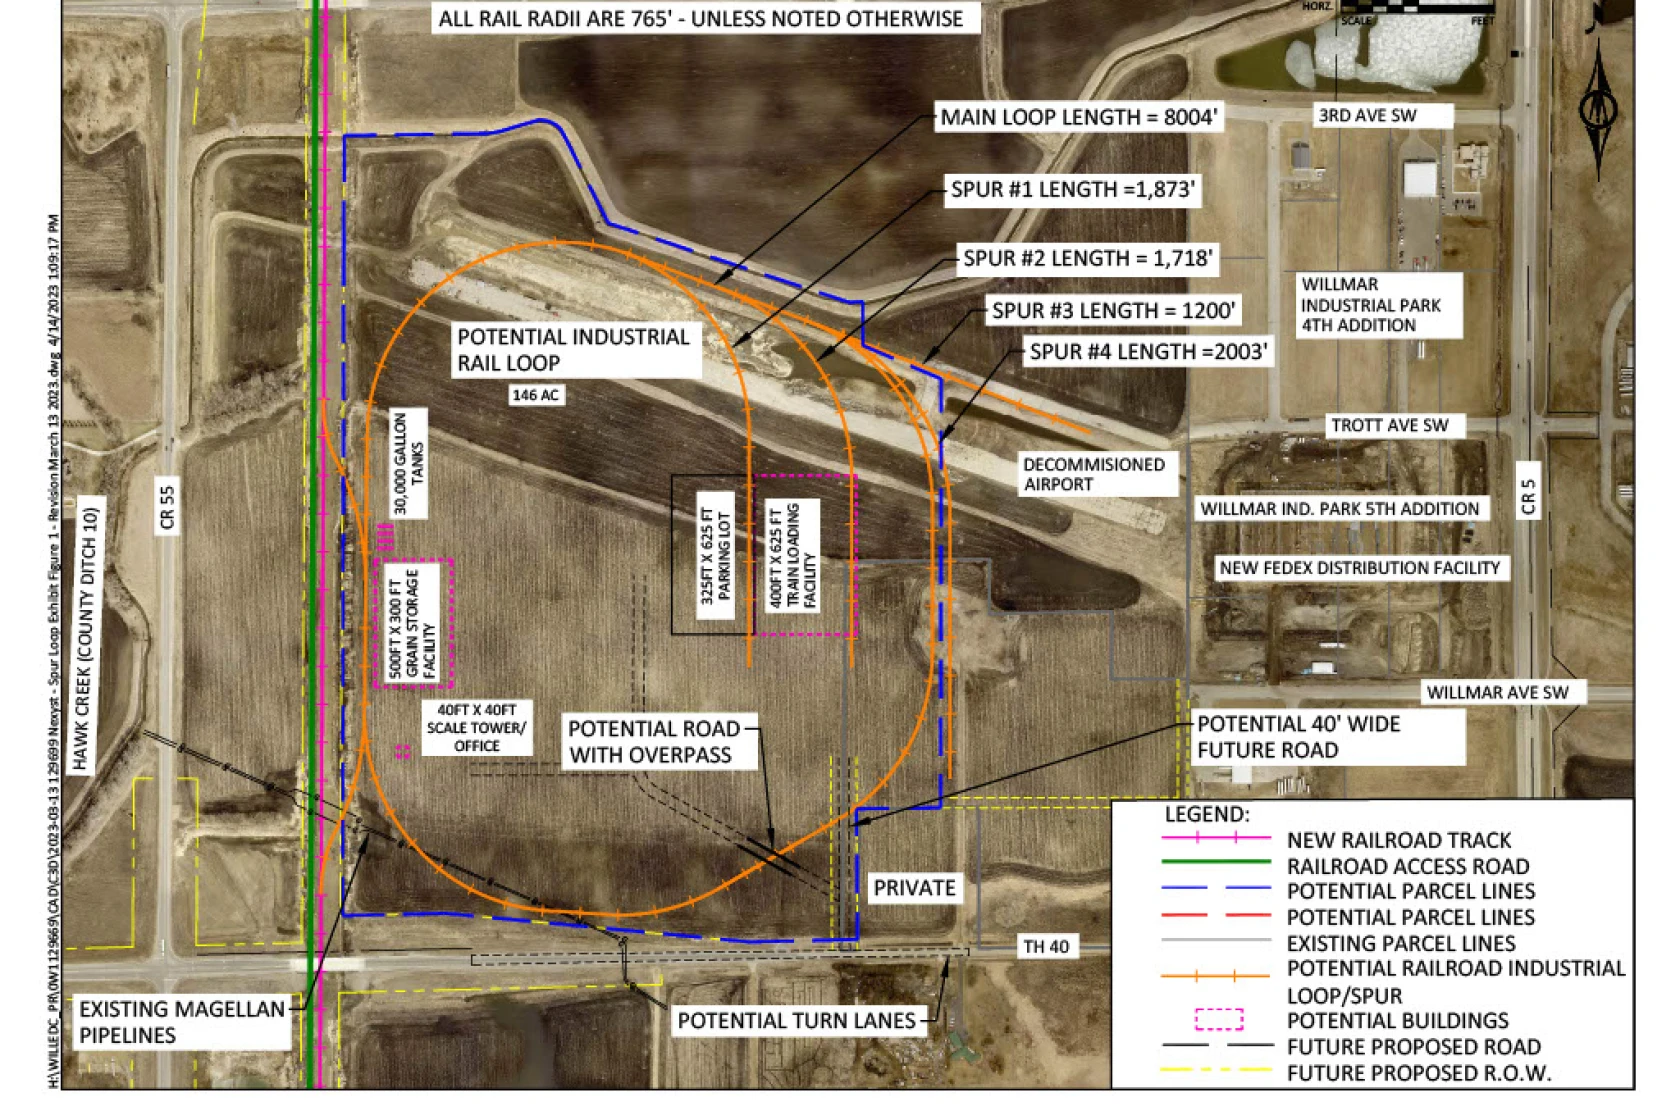 Purchase agreement signed for rail park